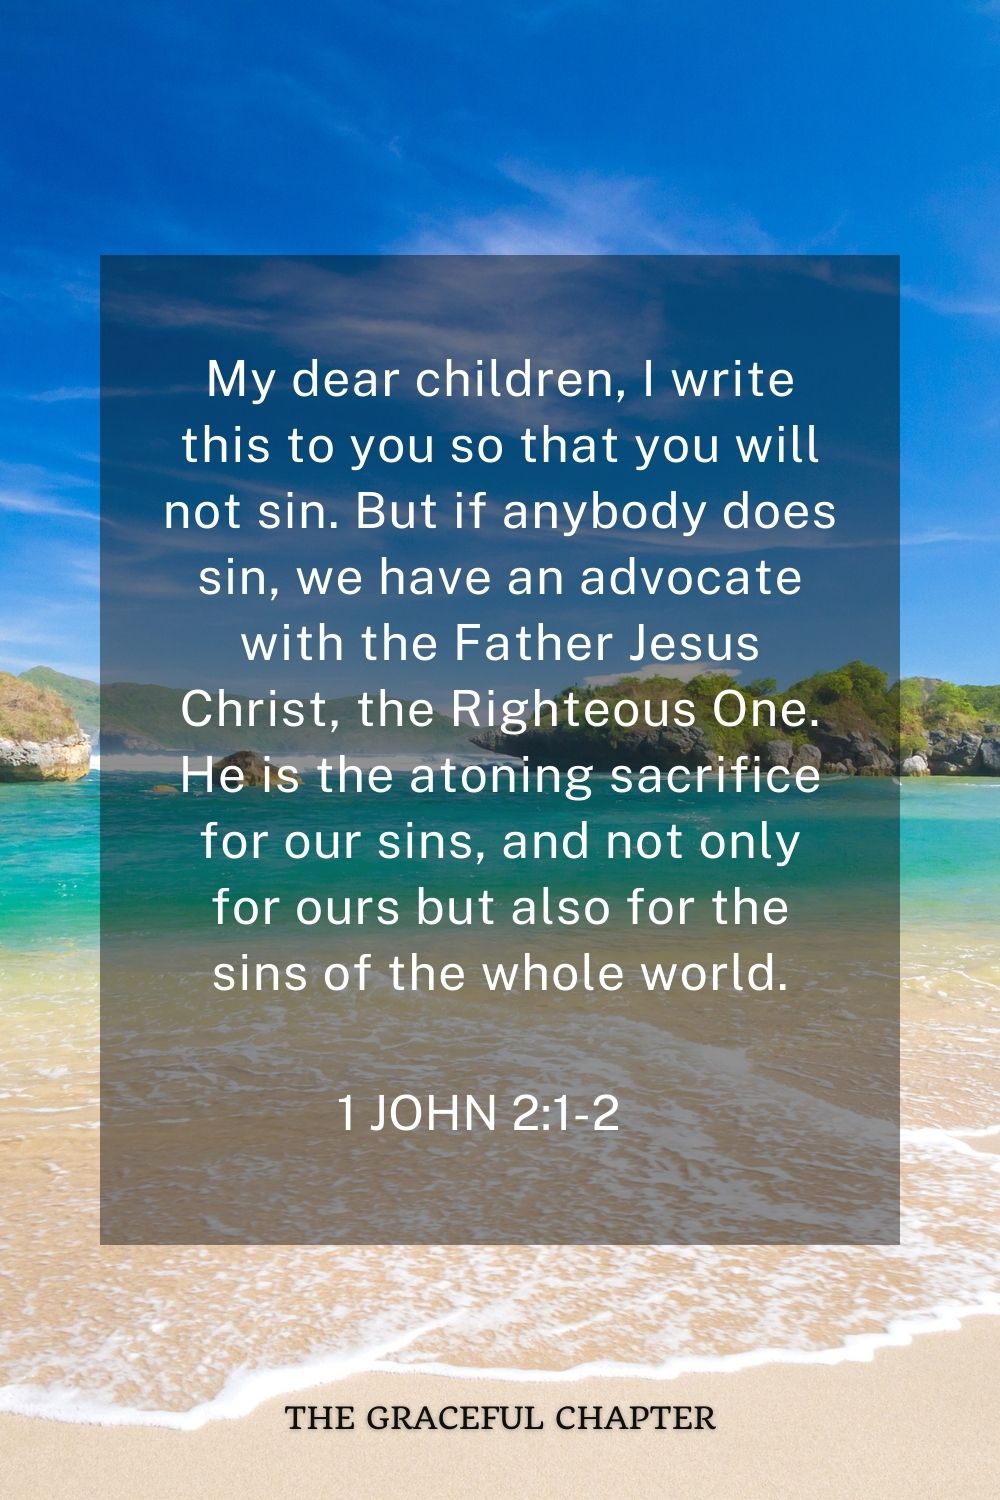 My dear children, I write this to you so that you will not sin. But if anybody does sin, we have an advocate with the Father Jesus Christ, the Righteous One. He is the atoning sacrifice for our sins, and not only for ours but also for the sins of the whole world. 1 John 2:1-2